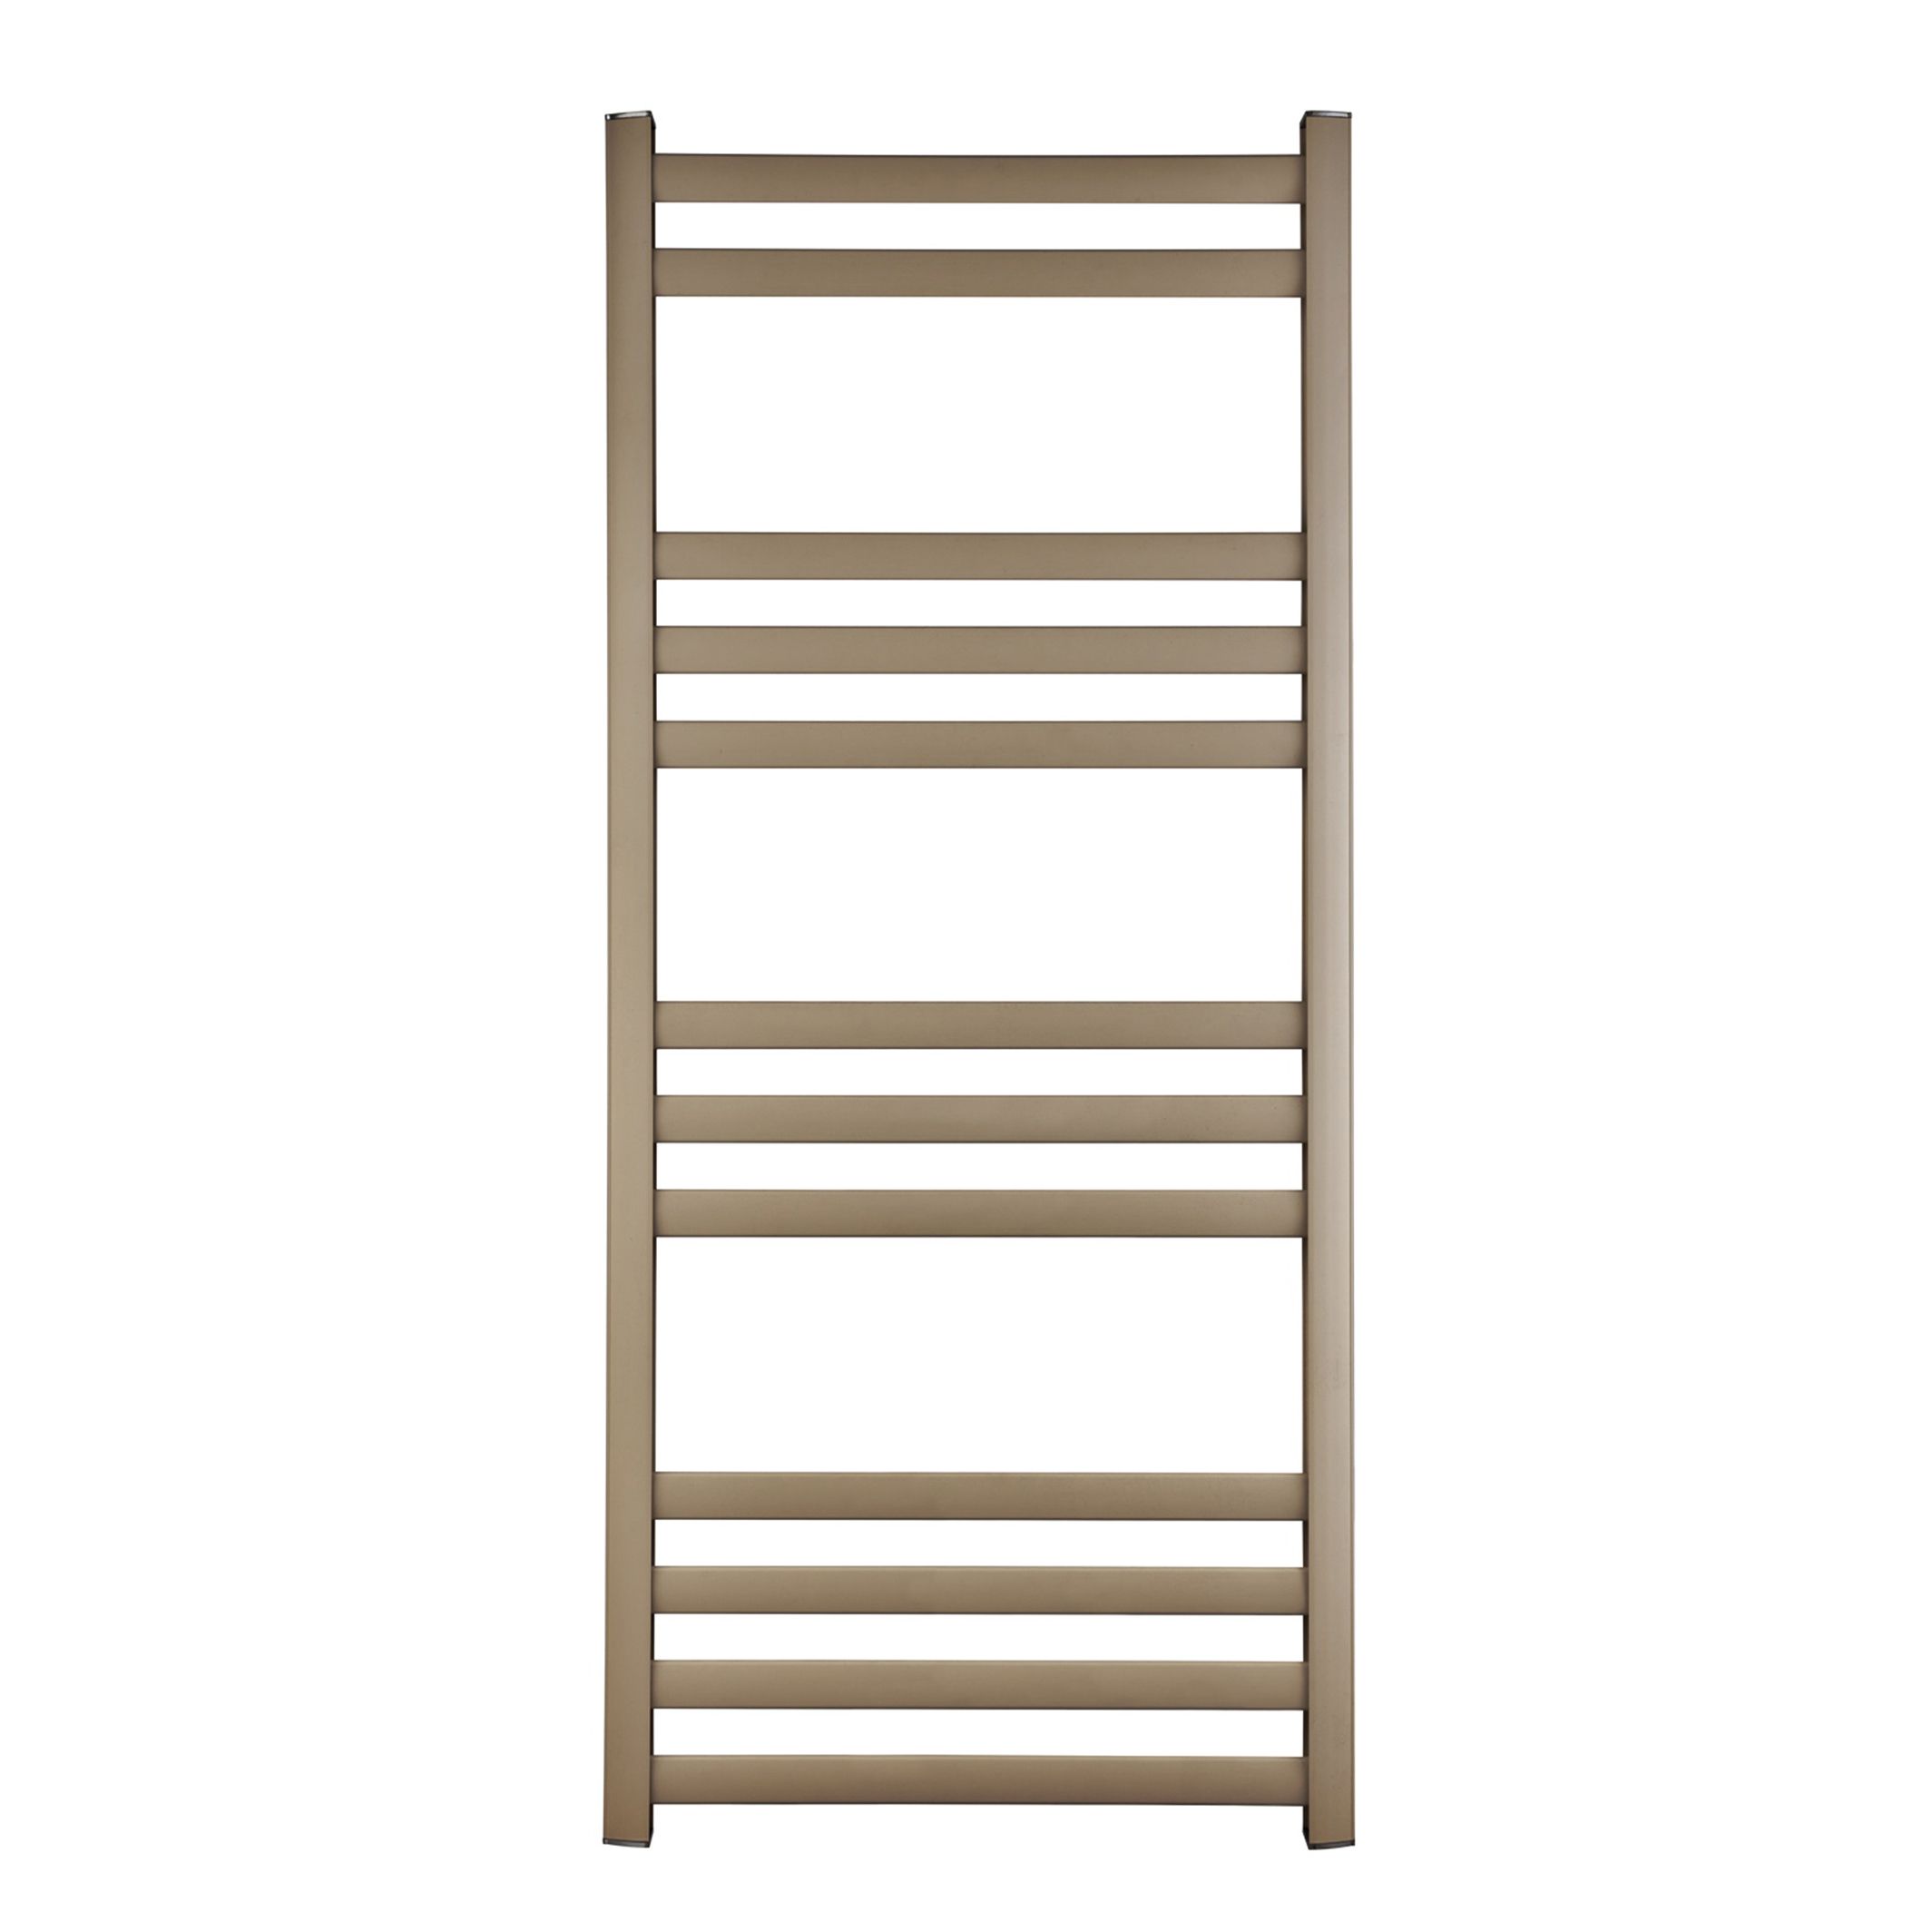 GoodHome Lansing, Beige Vertical Curved Towel radiator (W)475mm x (H)1100mm